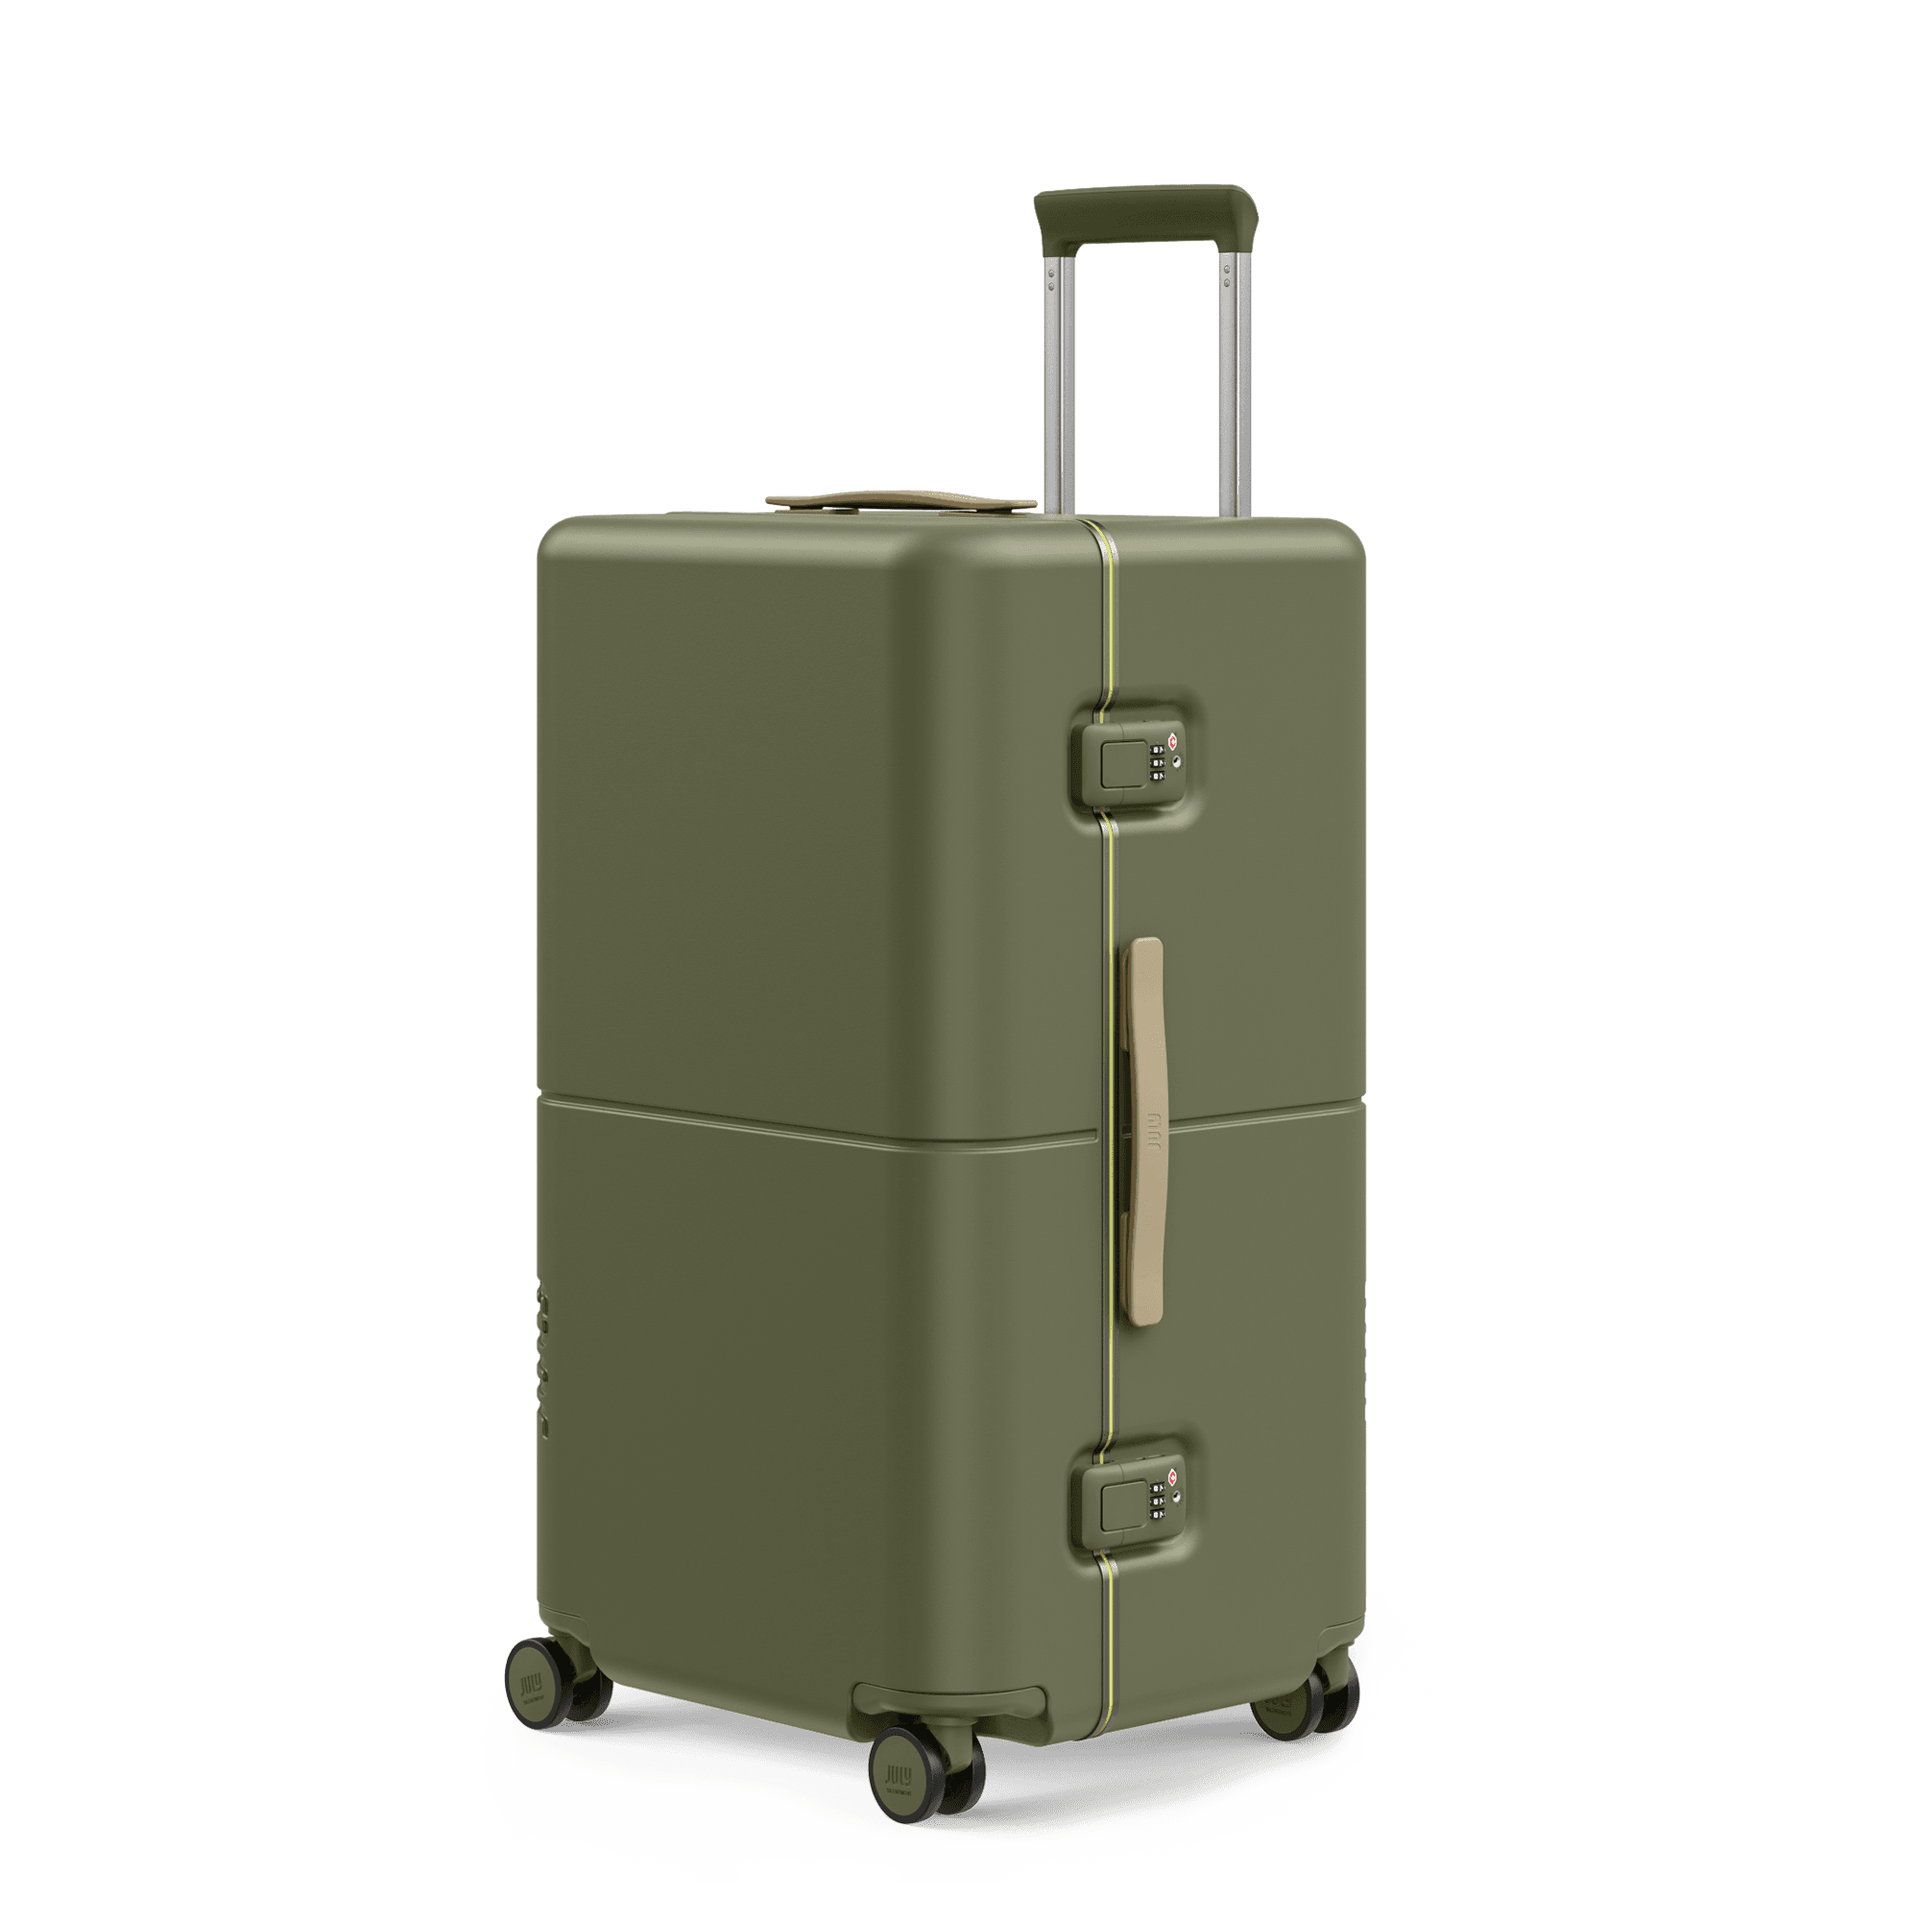 Heritage Trunk Suitcases | July